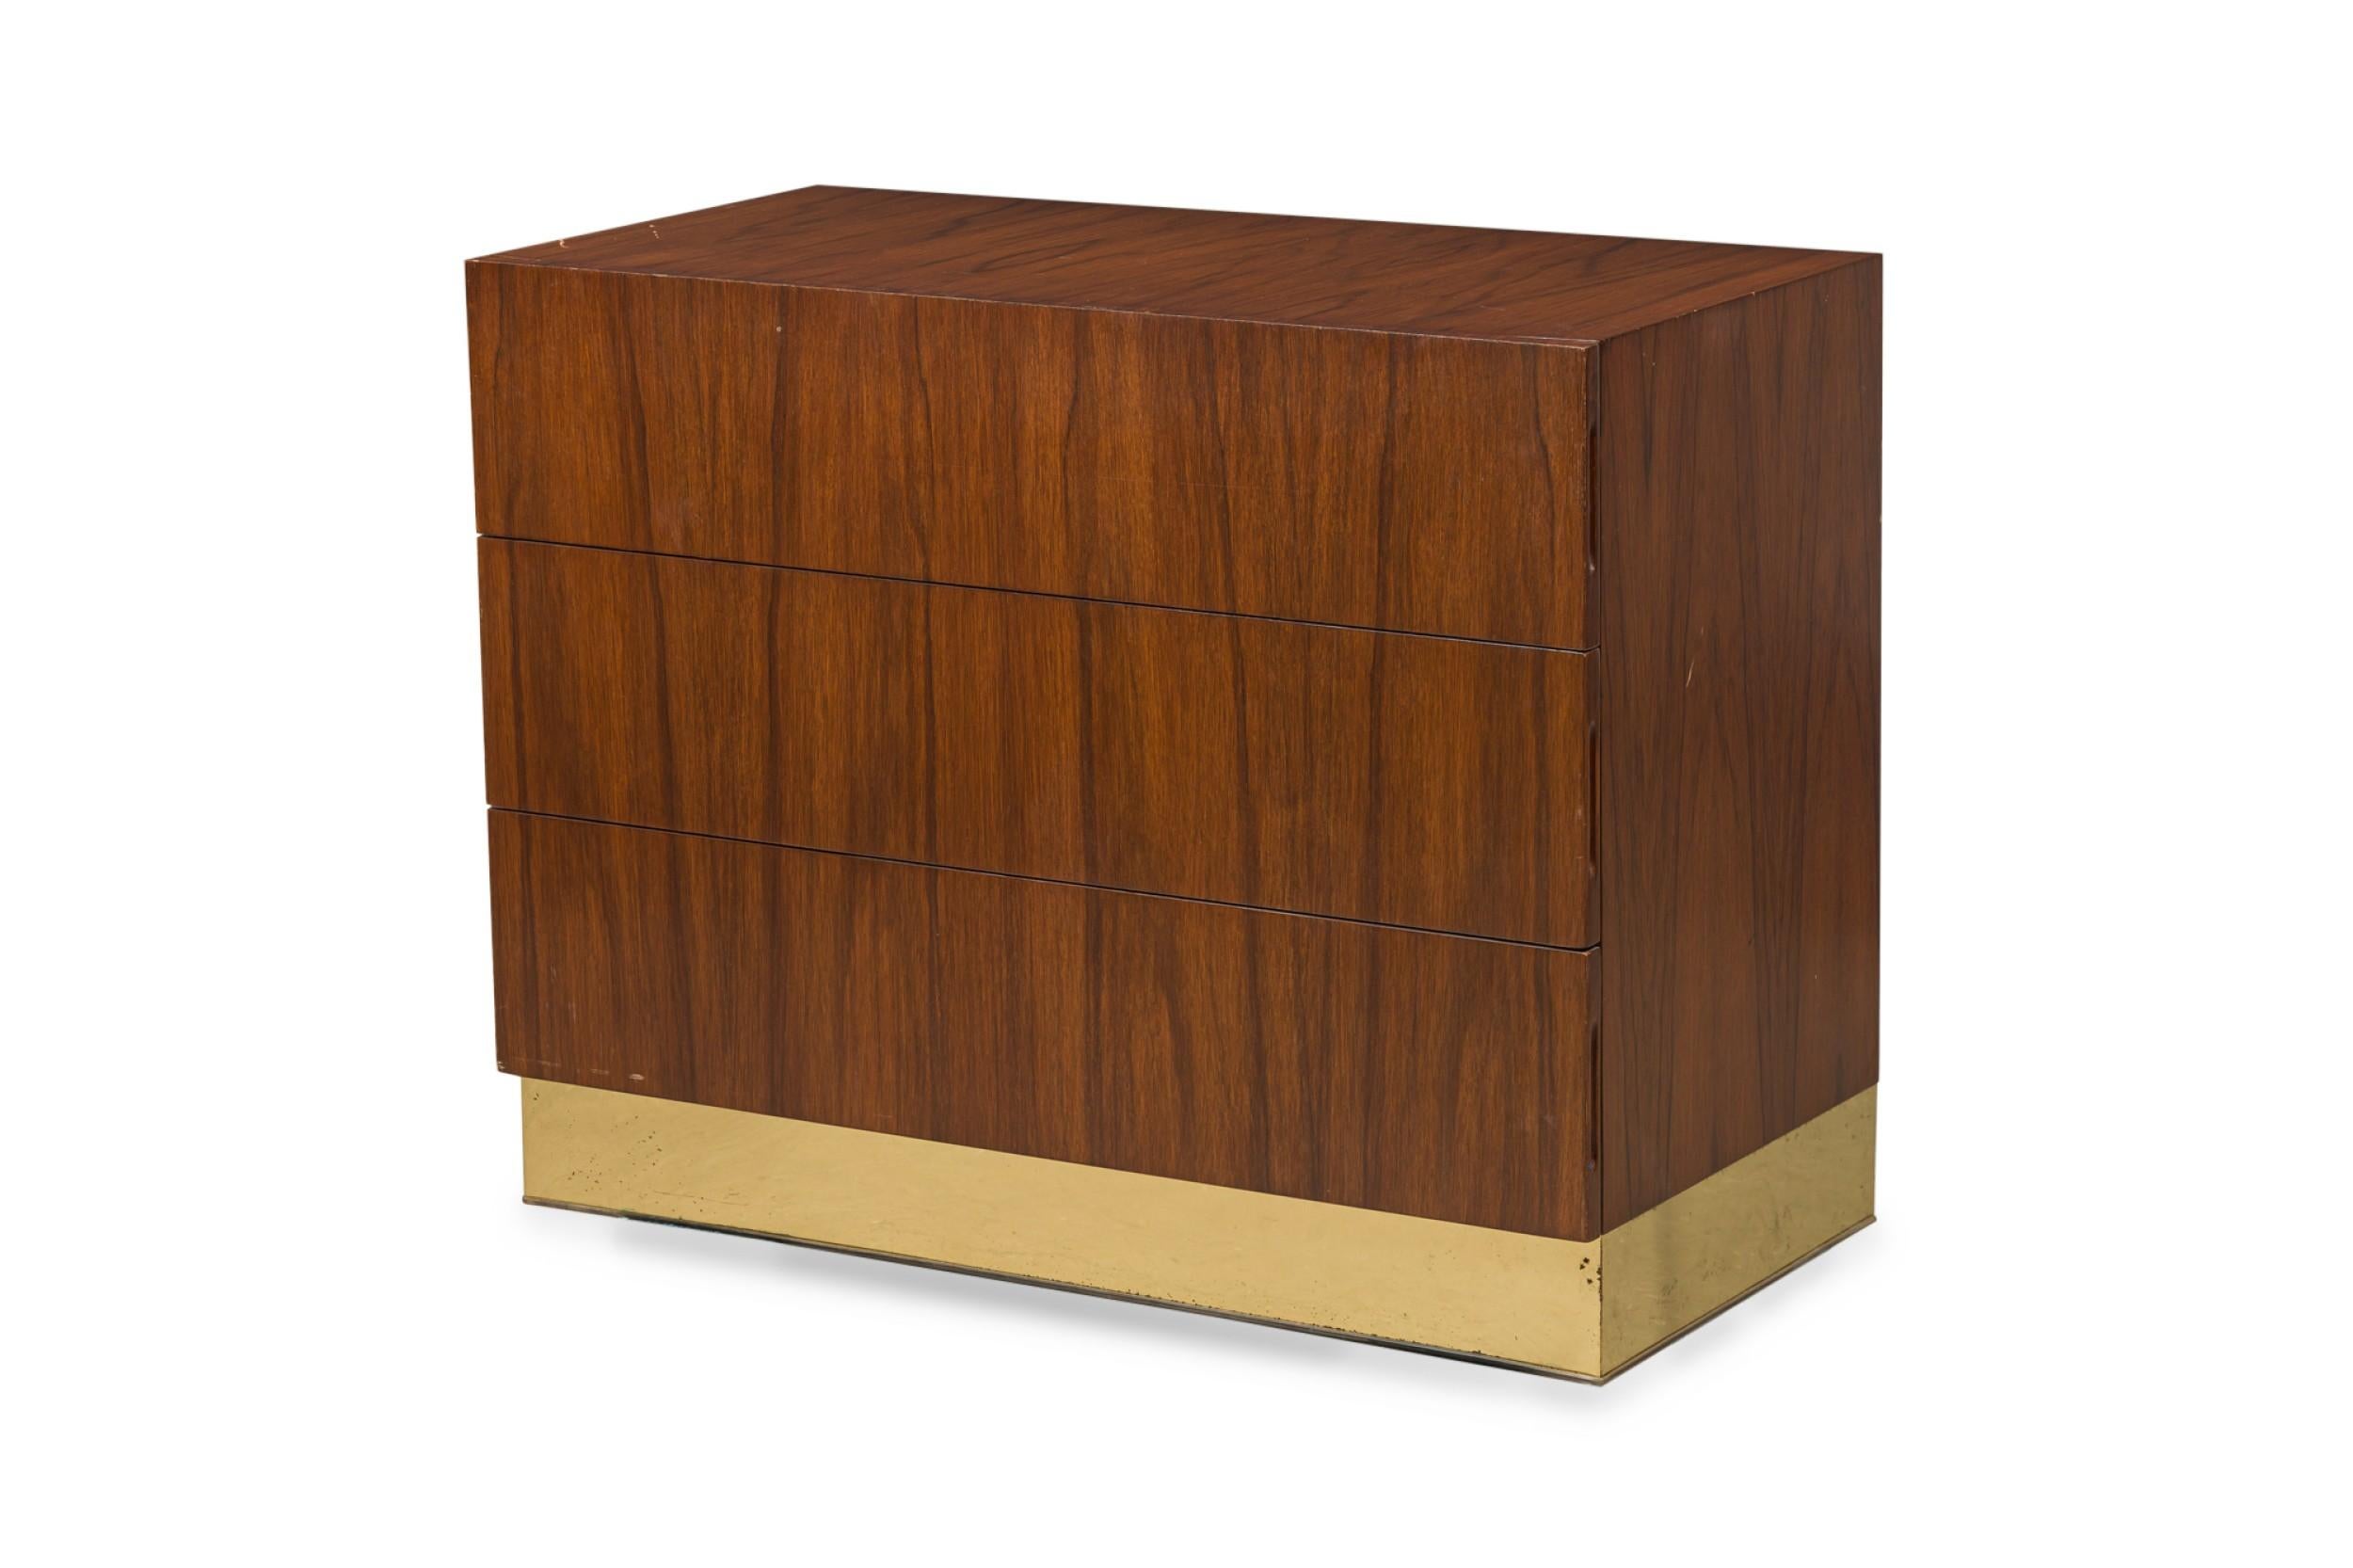 American Mid-Century 3-drawer commode / chest of drawers finished in rosewood veneer and a brass veneer band around the base. (MILO BAUGHMAN)
 

 Minor scuffs to finish on both wood and brass
